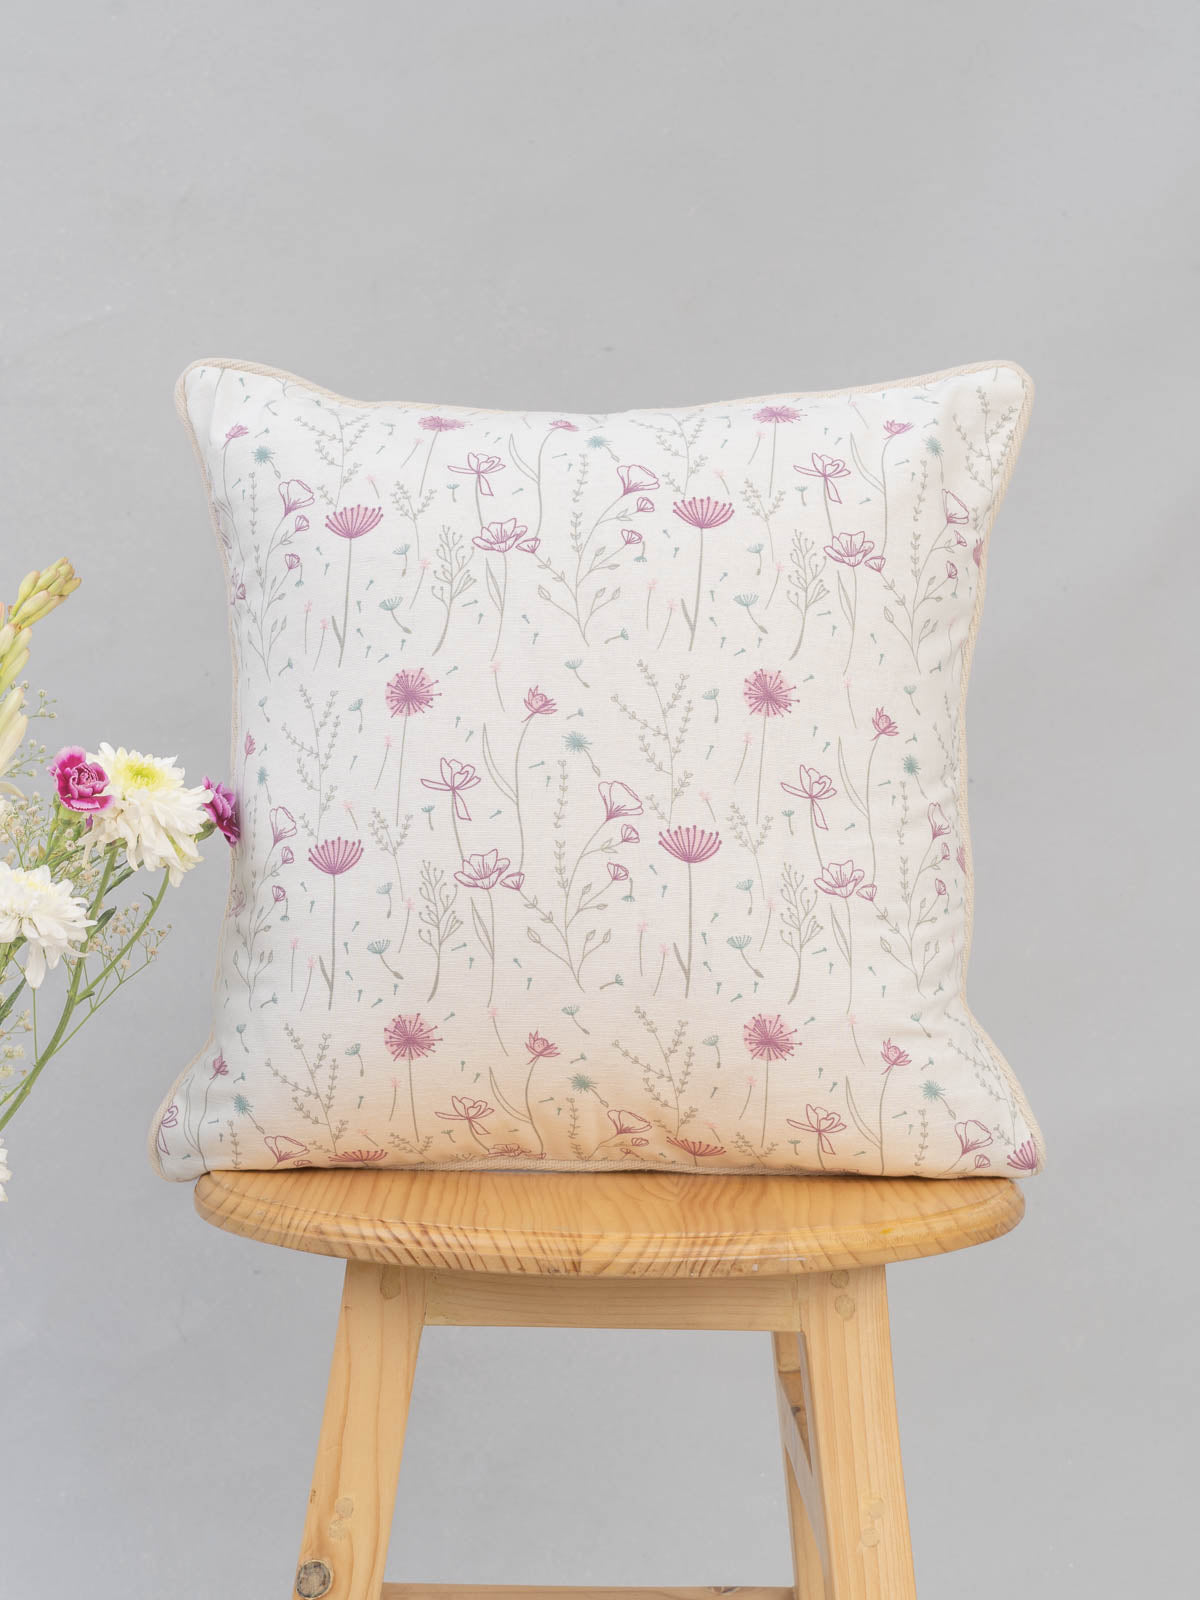 Drifting dandelion 100% cotton customisable floral cushion cover for sofa - Pink